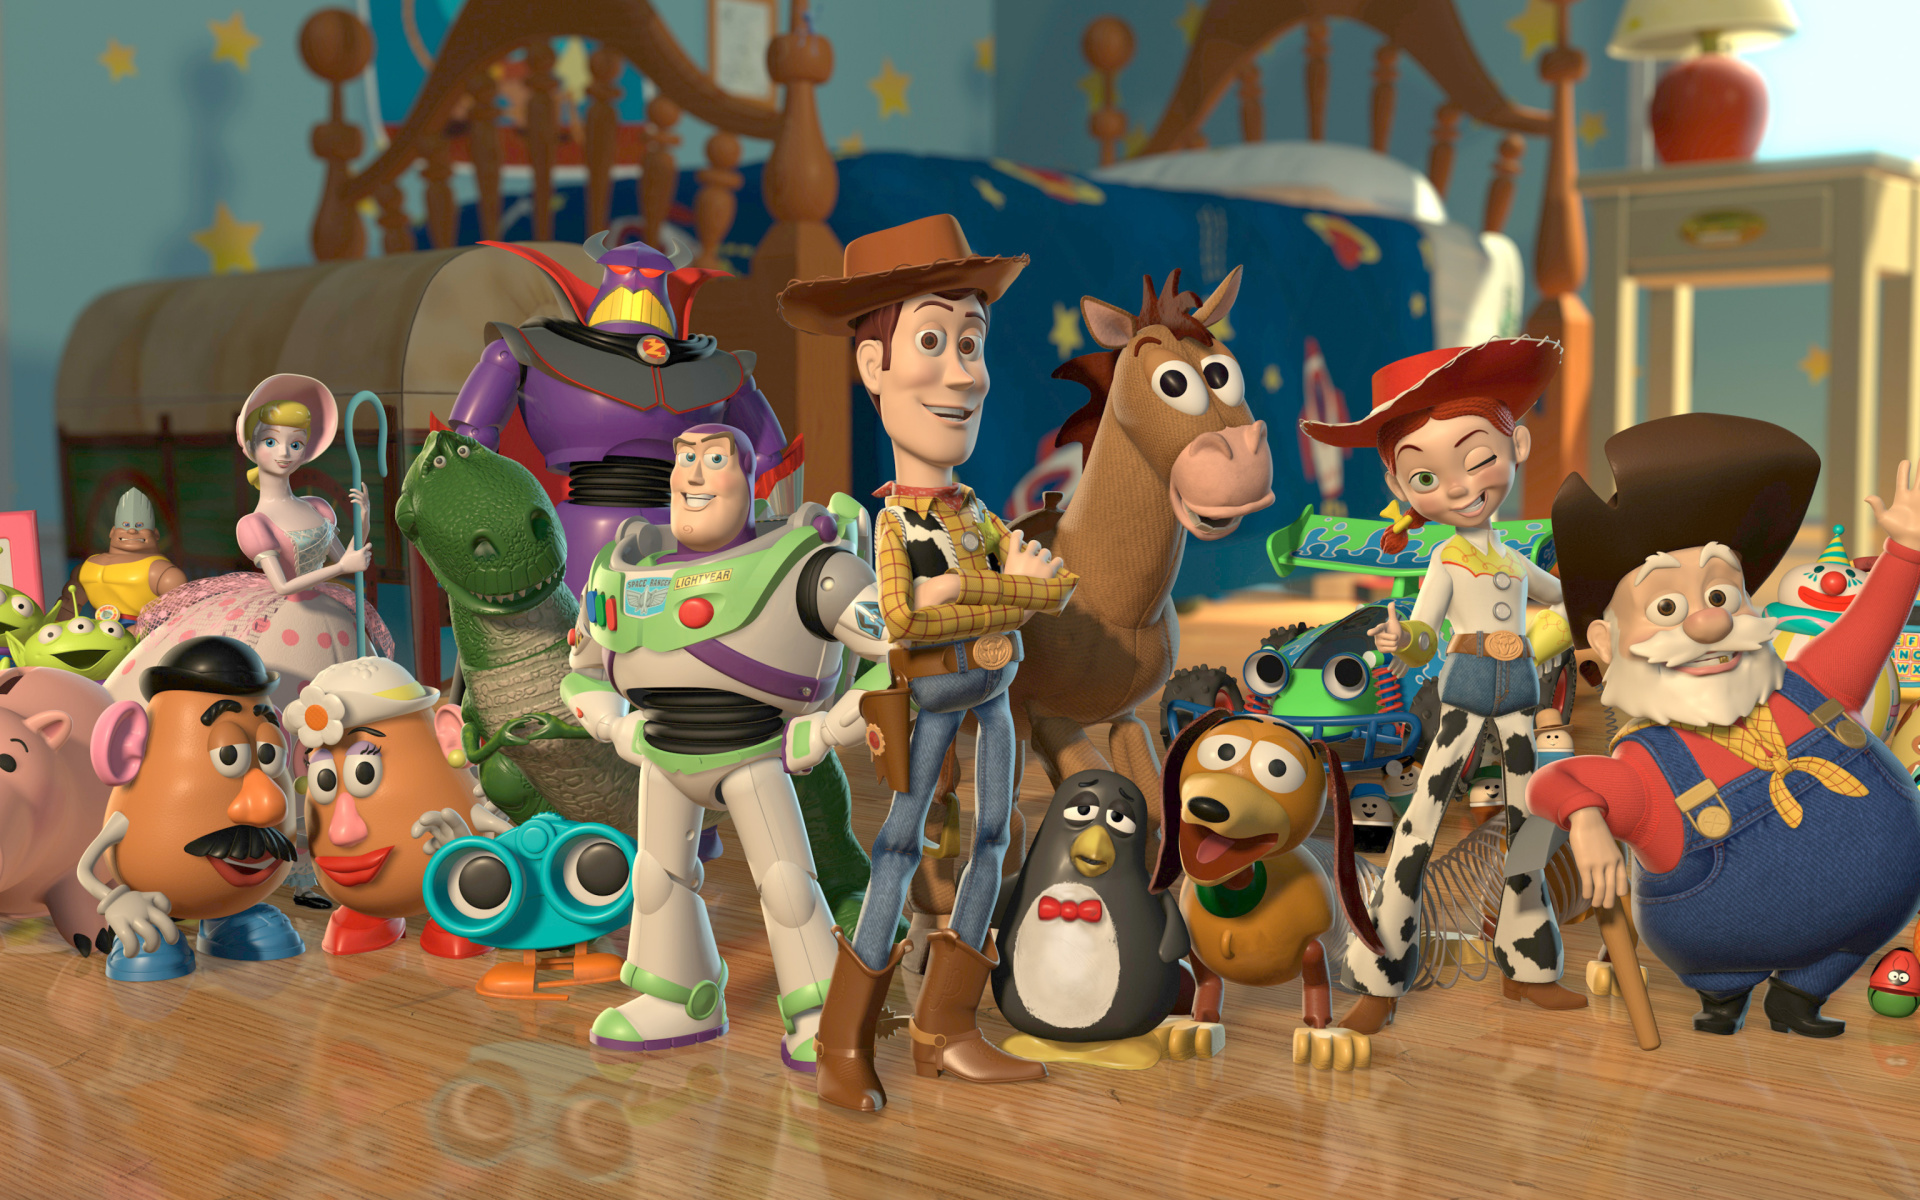 Toy Story wallpaper 1920x1200